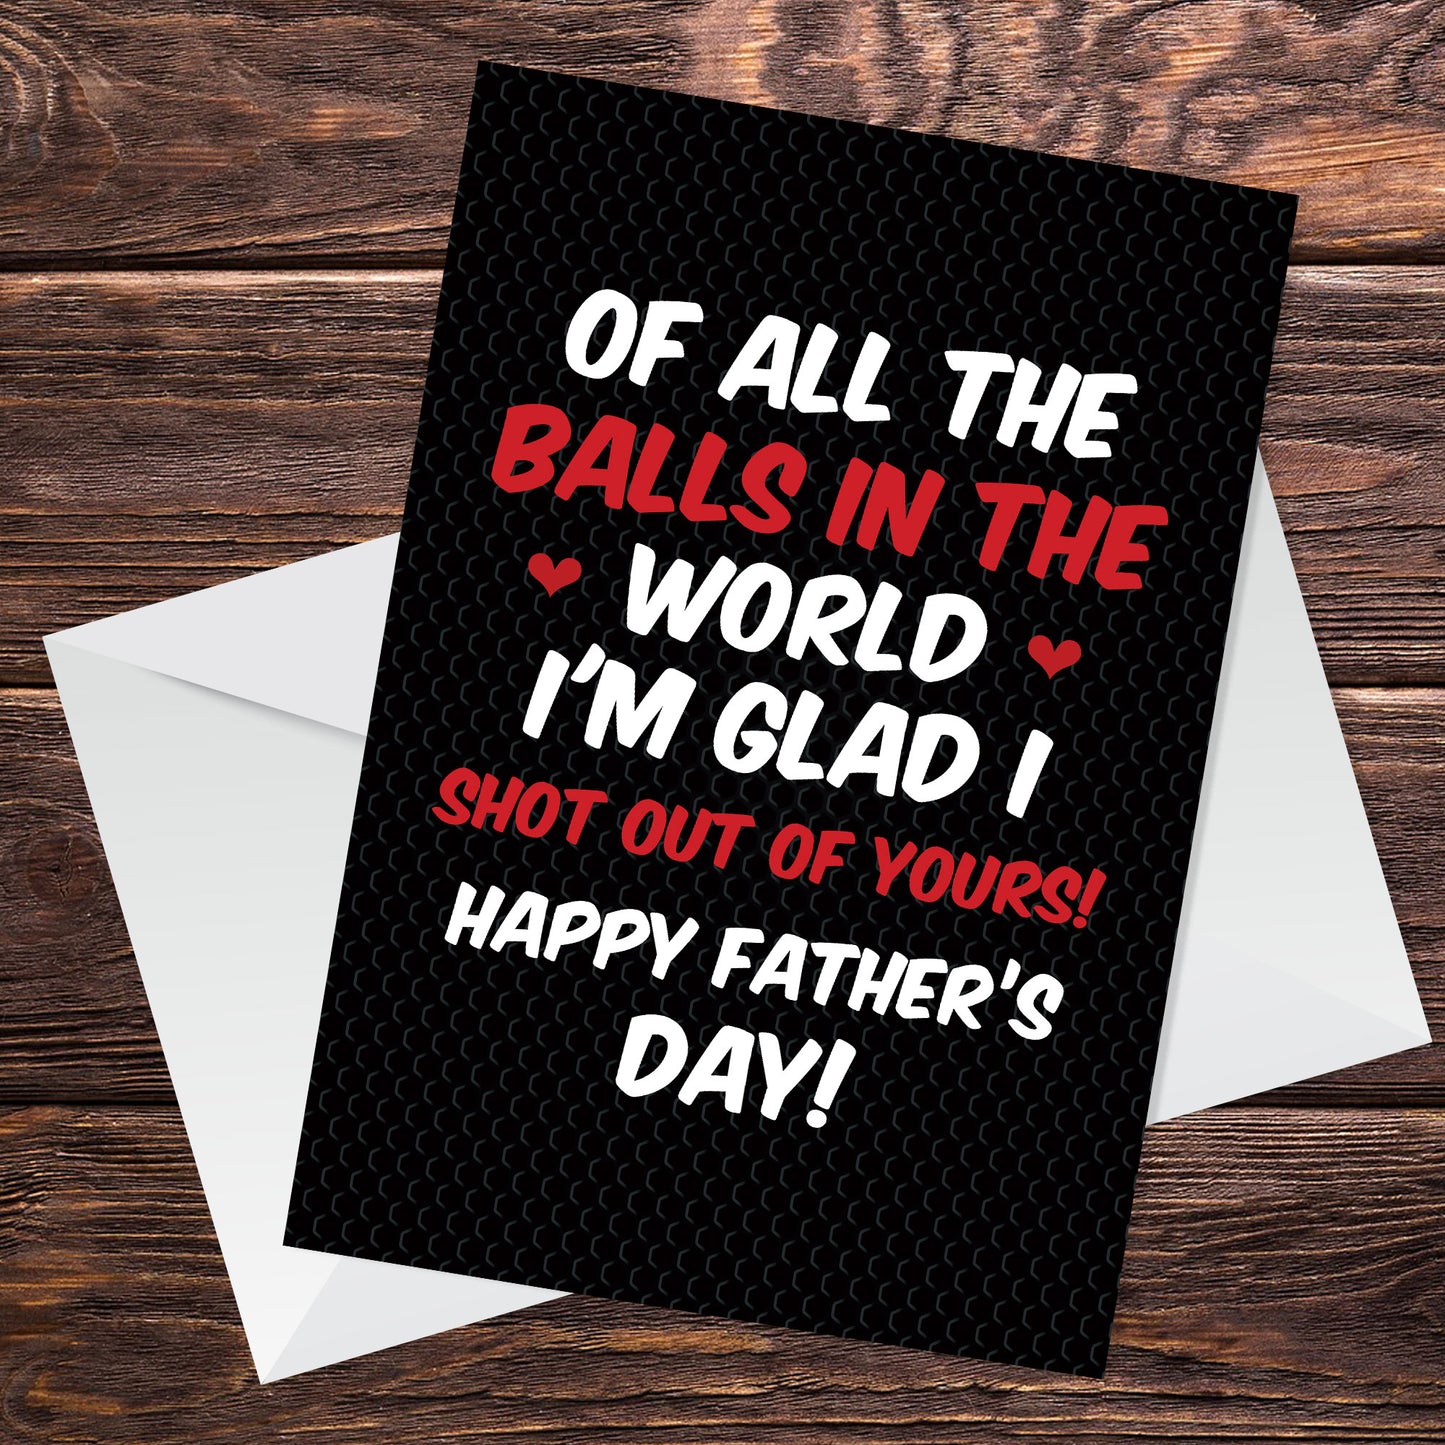 Funny Rude Fathers Day Card For Dad A6 Card Joke Dad Card